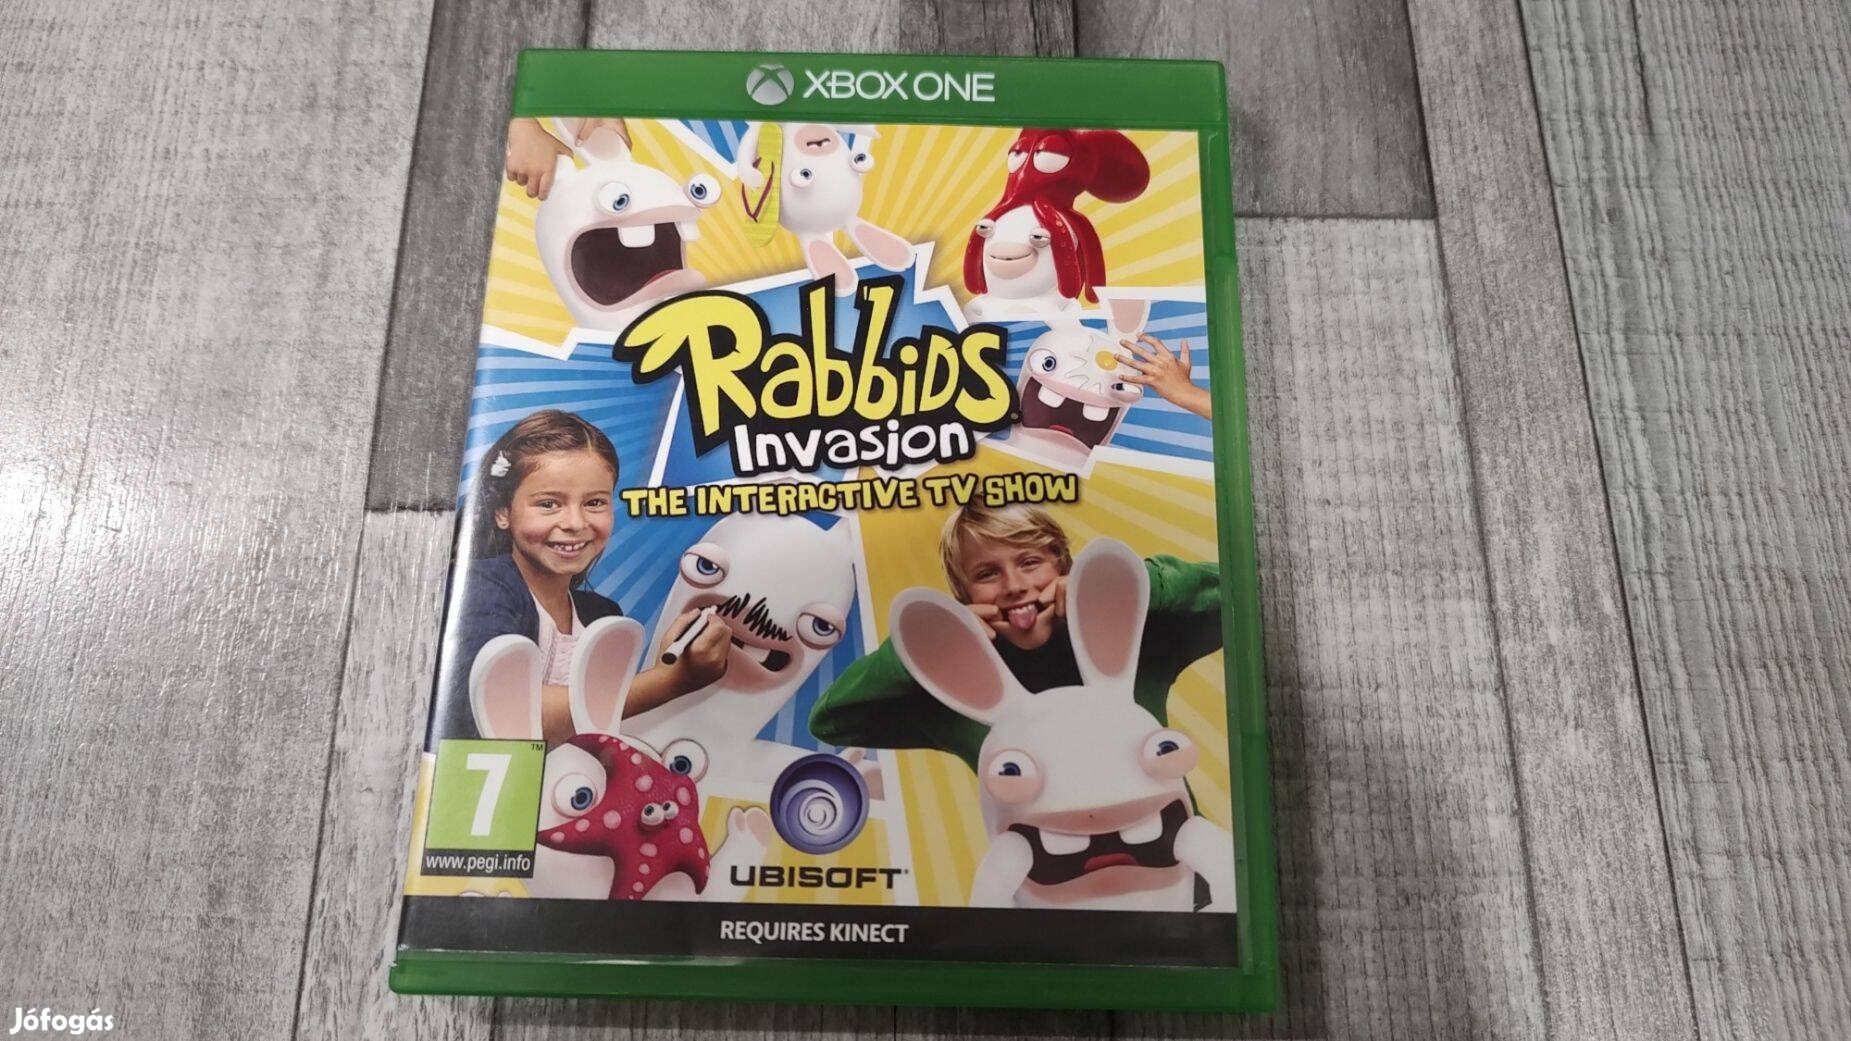 Xbox One(S/X) : Kinect Rabbids Invasion The Interactive Tv Show